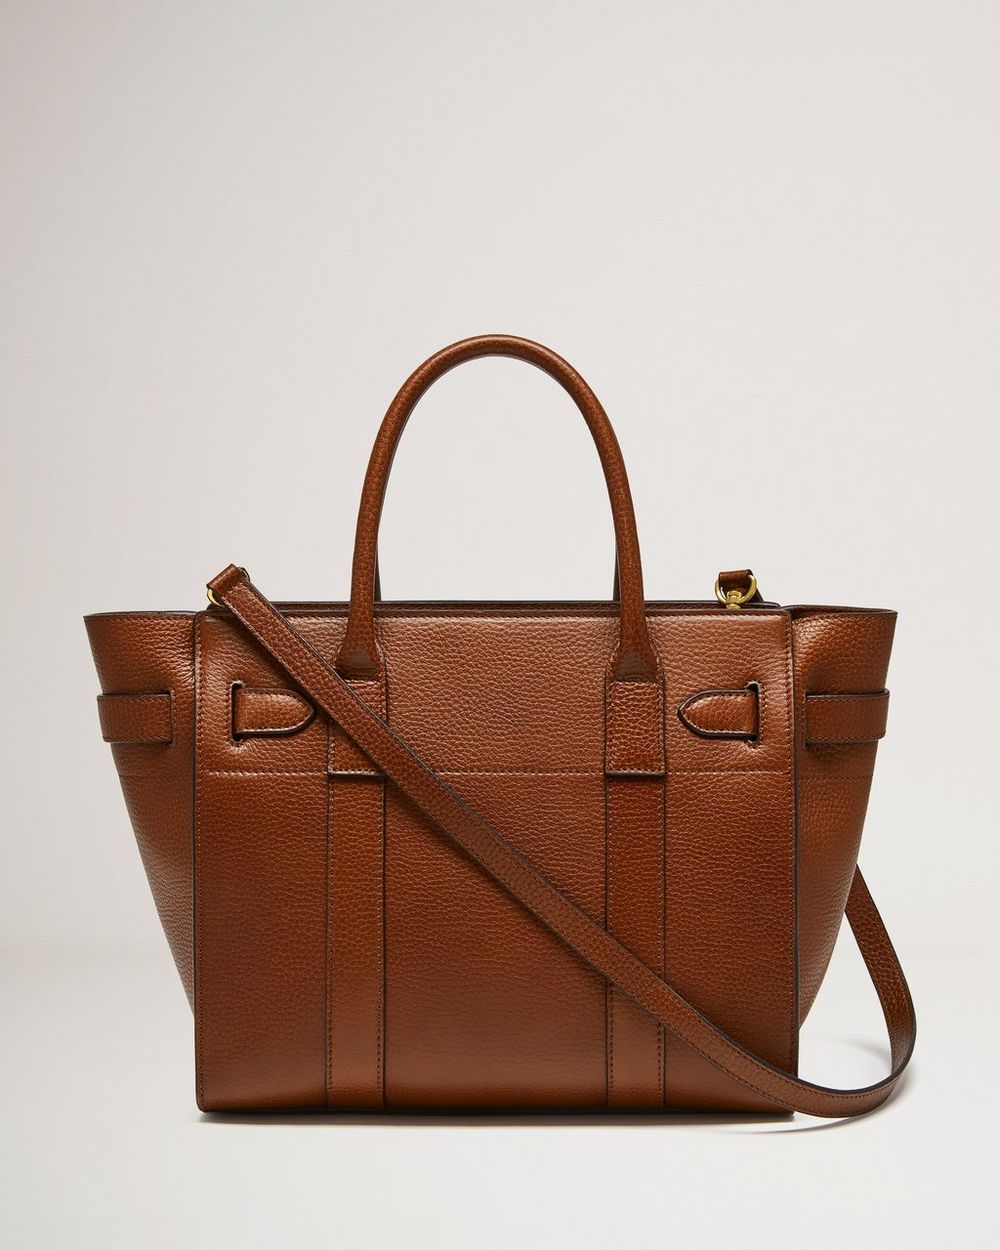 Women's Zipped Bayswater Small Bag by Mulberry